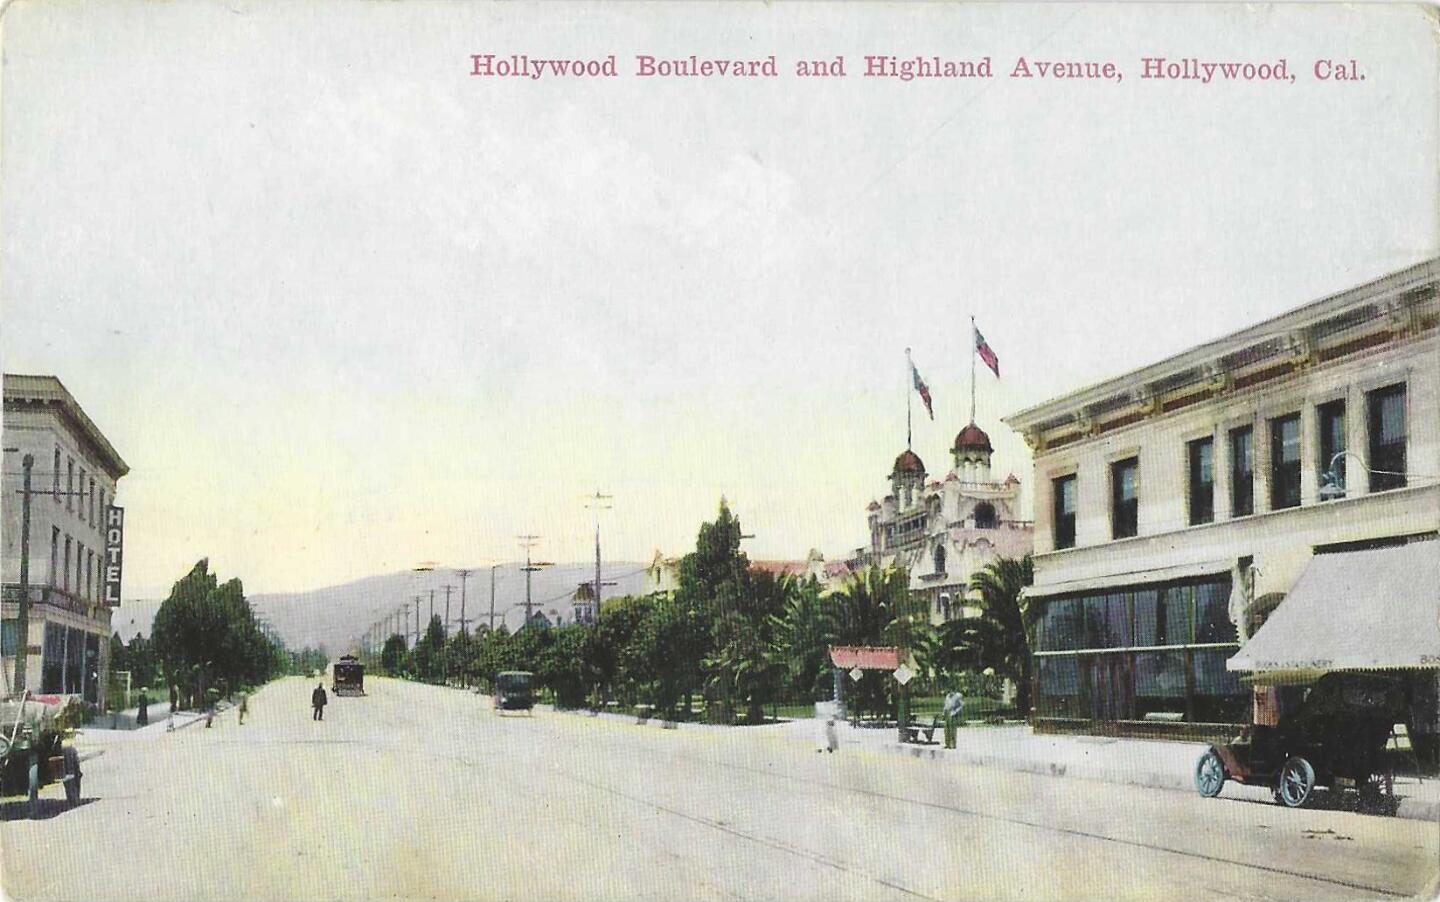 The Hollywood and Highland intersection is shown in a vintage postcard